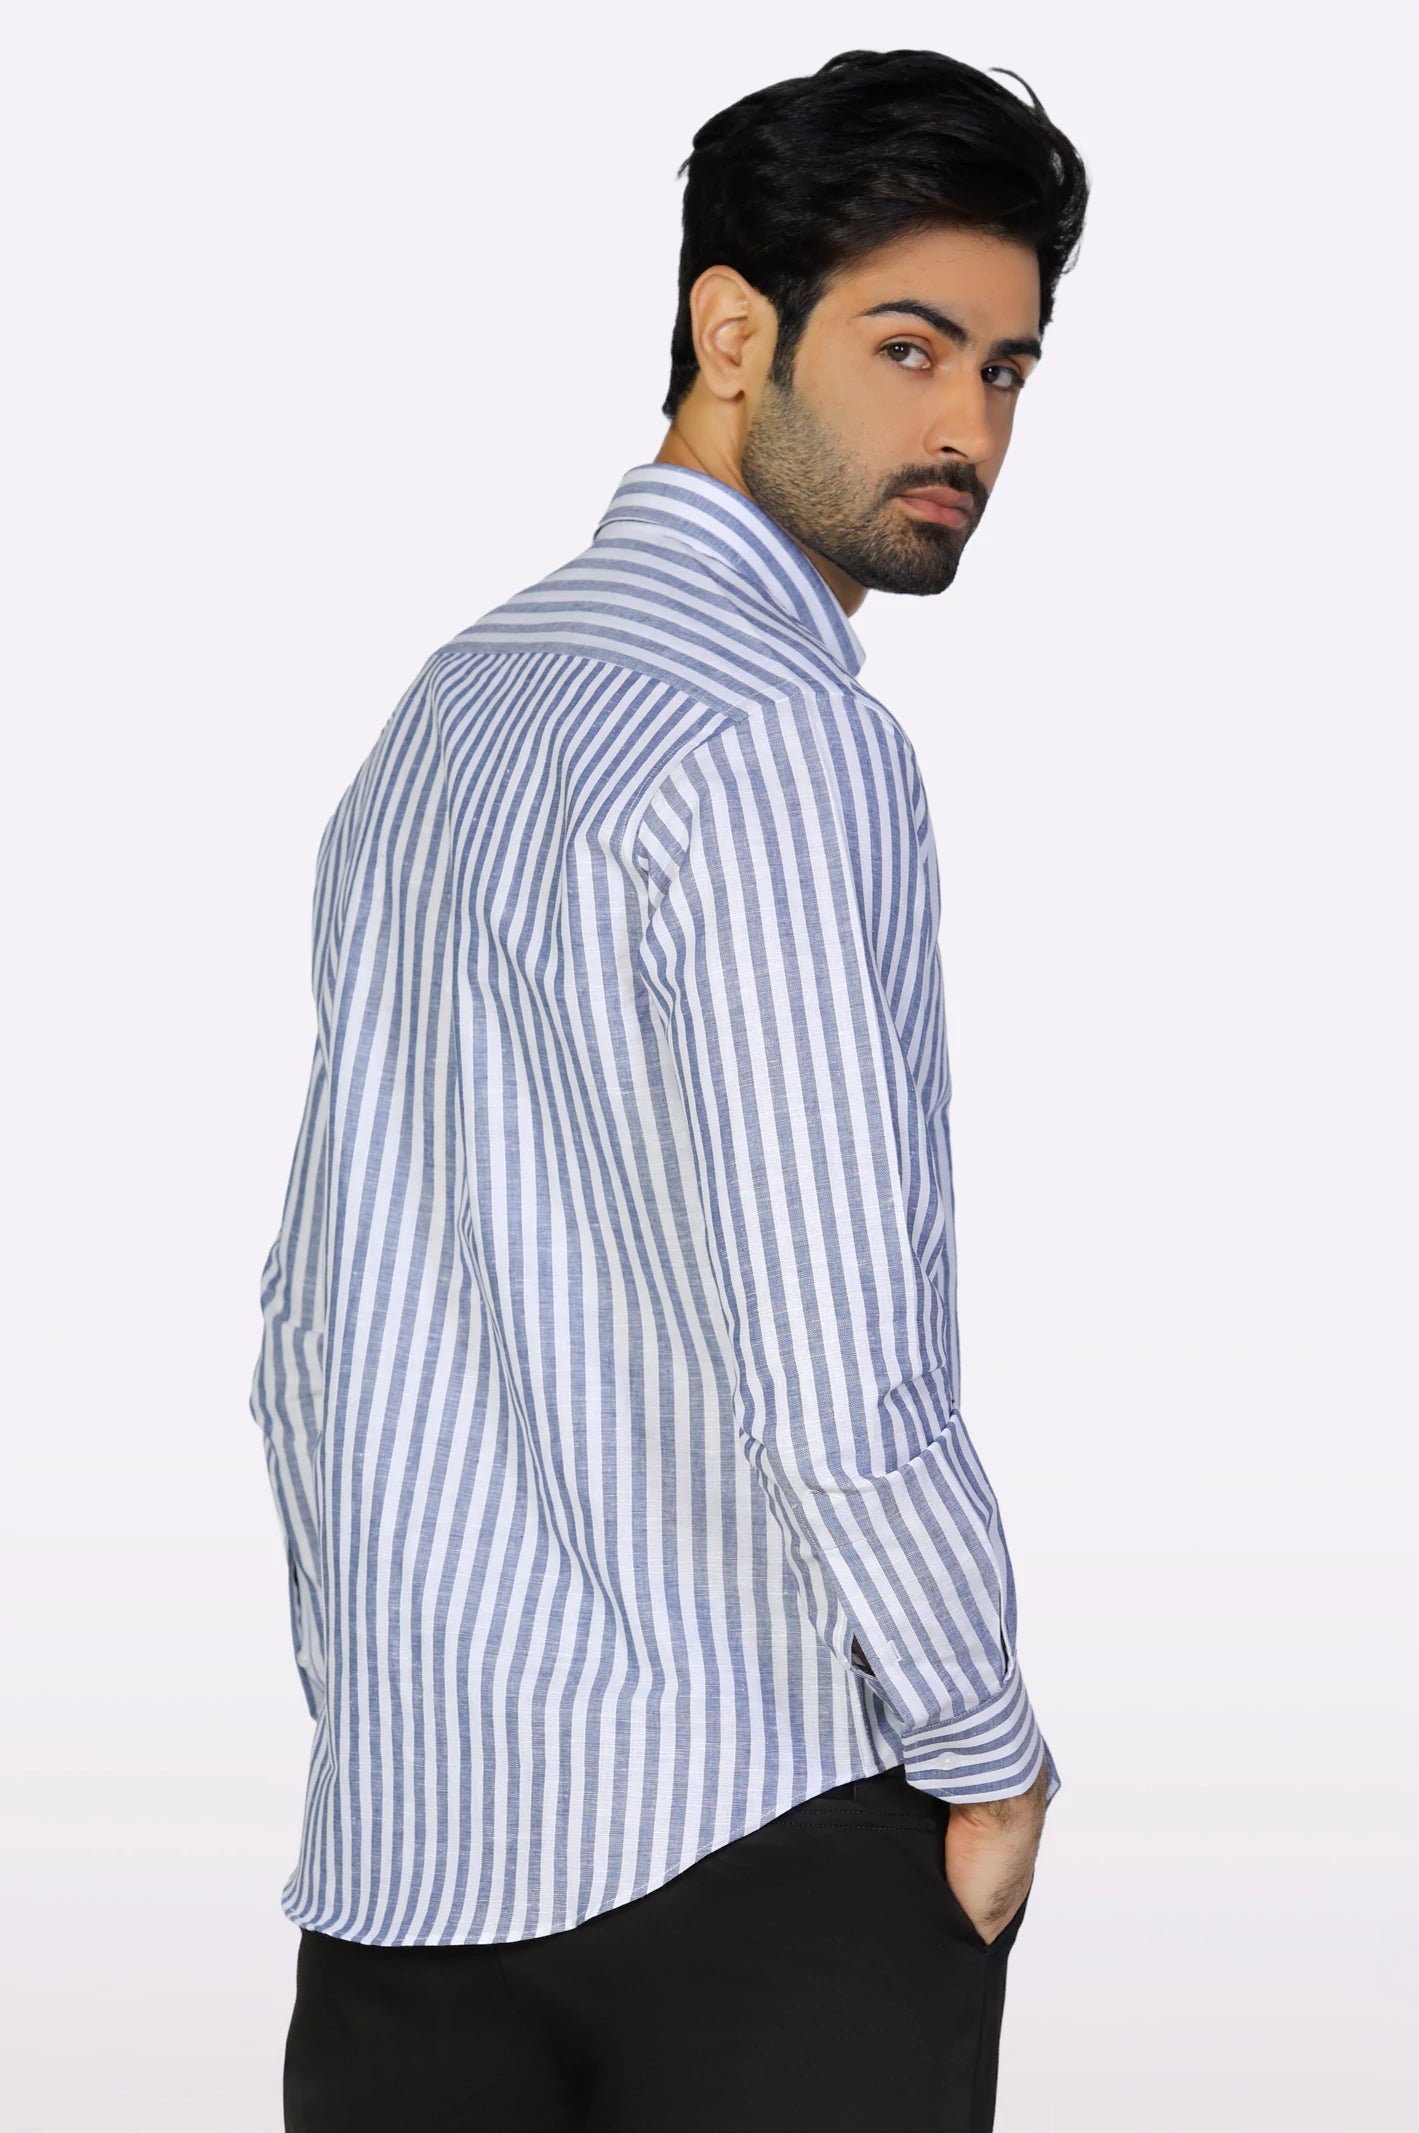 Blue Awning Stripe Casual Shirt From Diners